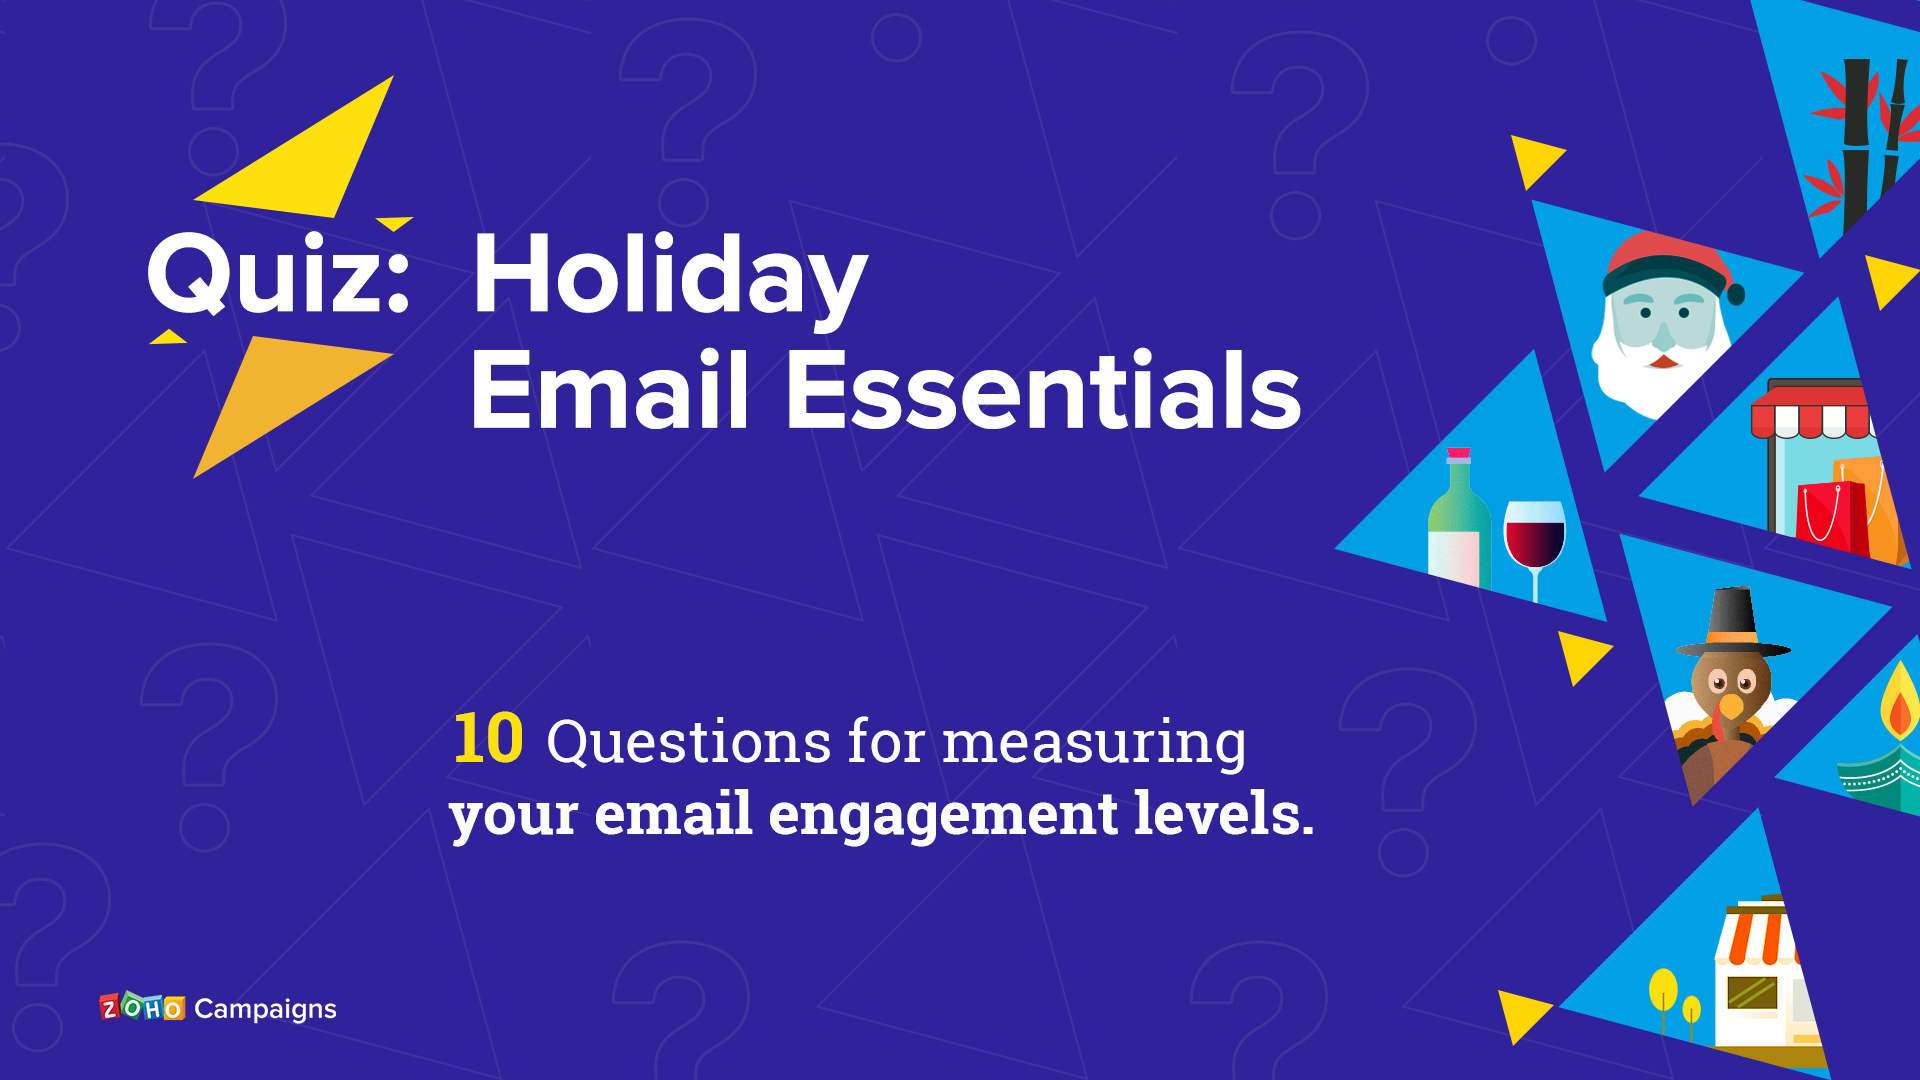 Holiday Email Essentials - An email marketing quiz to find your engagement levels 